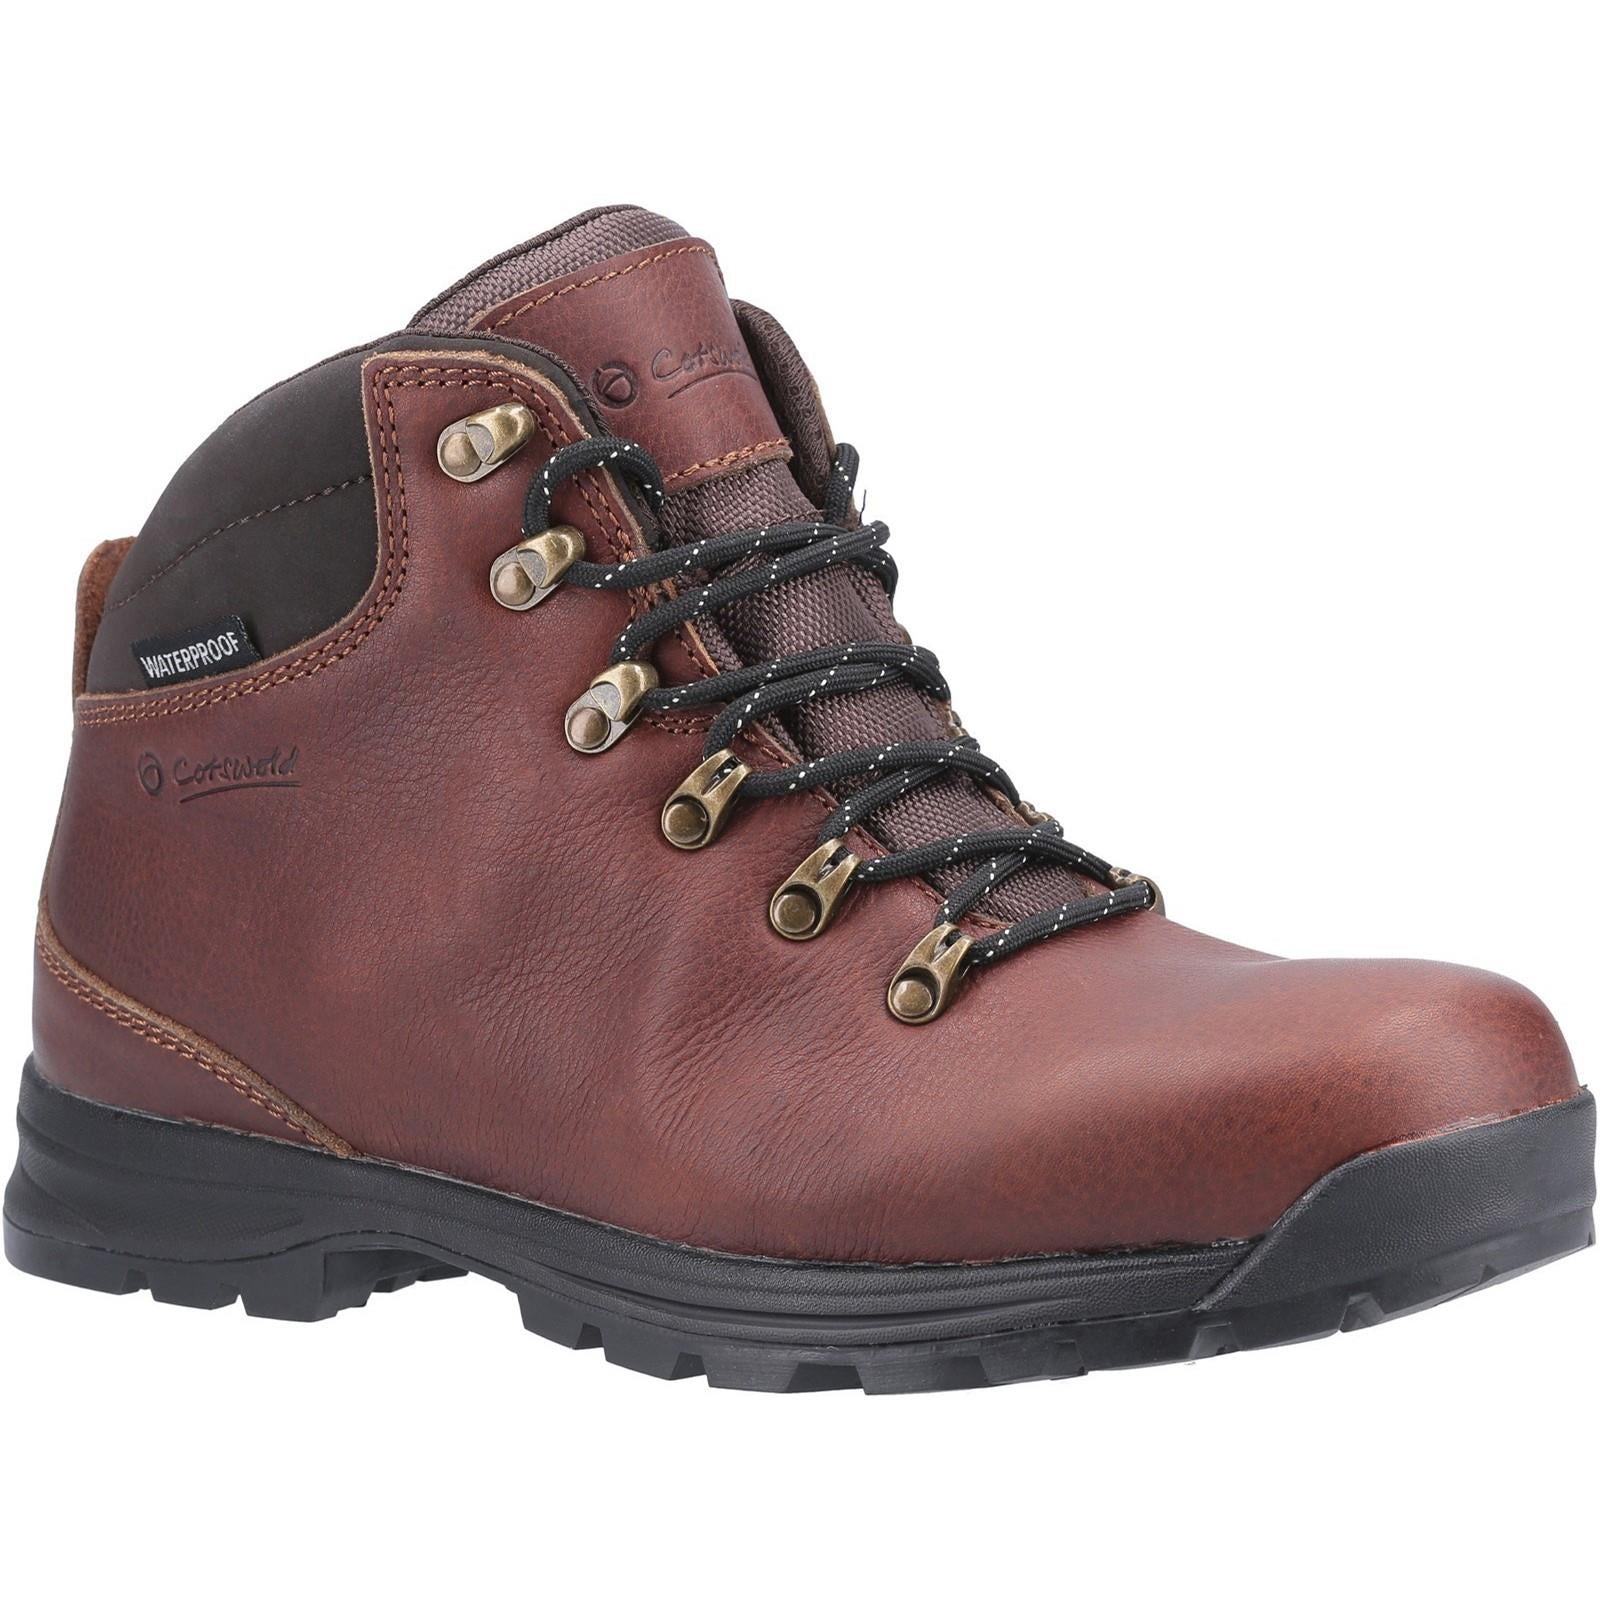 Cotswold Kingsway premium brown leather hill and trail waterproof walking boot